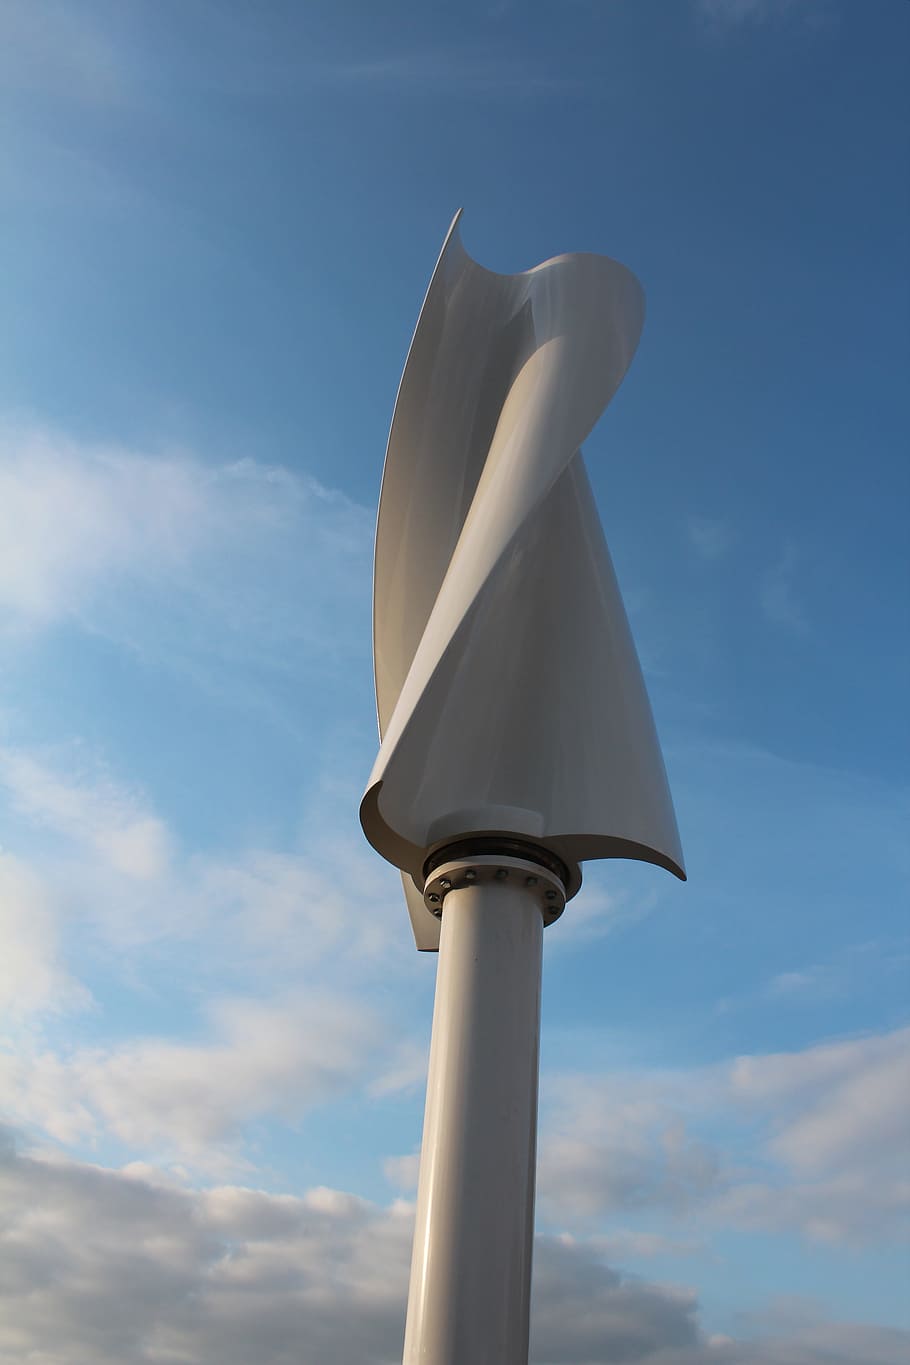 savonius rotor, vertical wind turbine, advertising wind system, sky, cloud - sky, low angle view, day, nature, built structure, blue